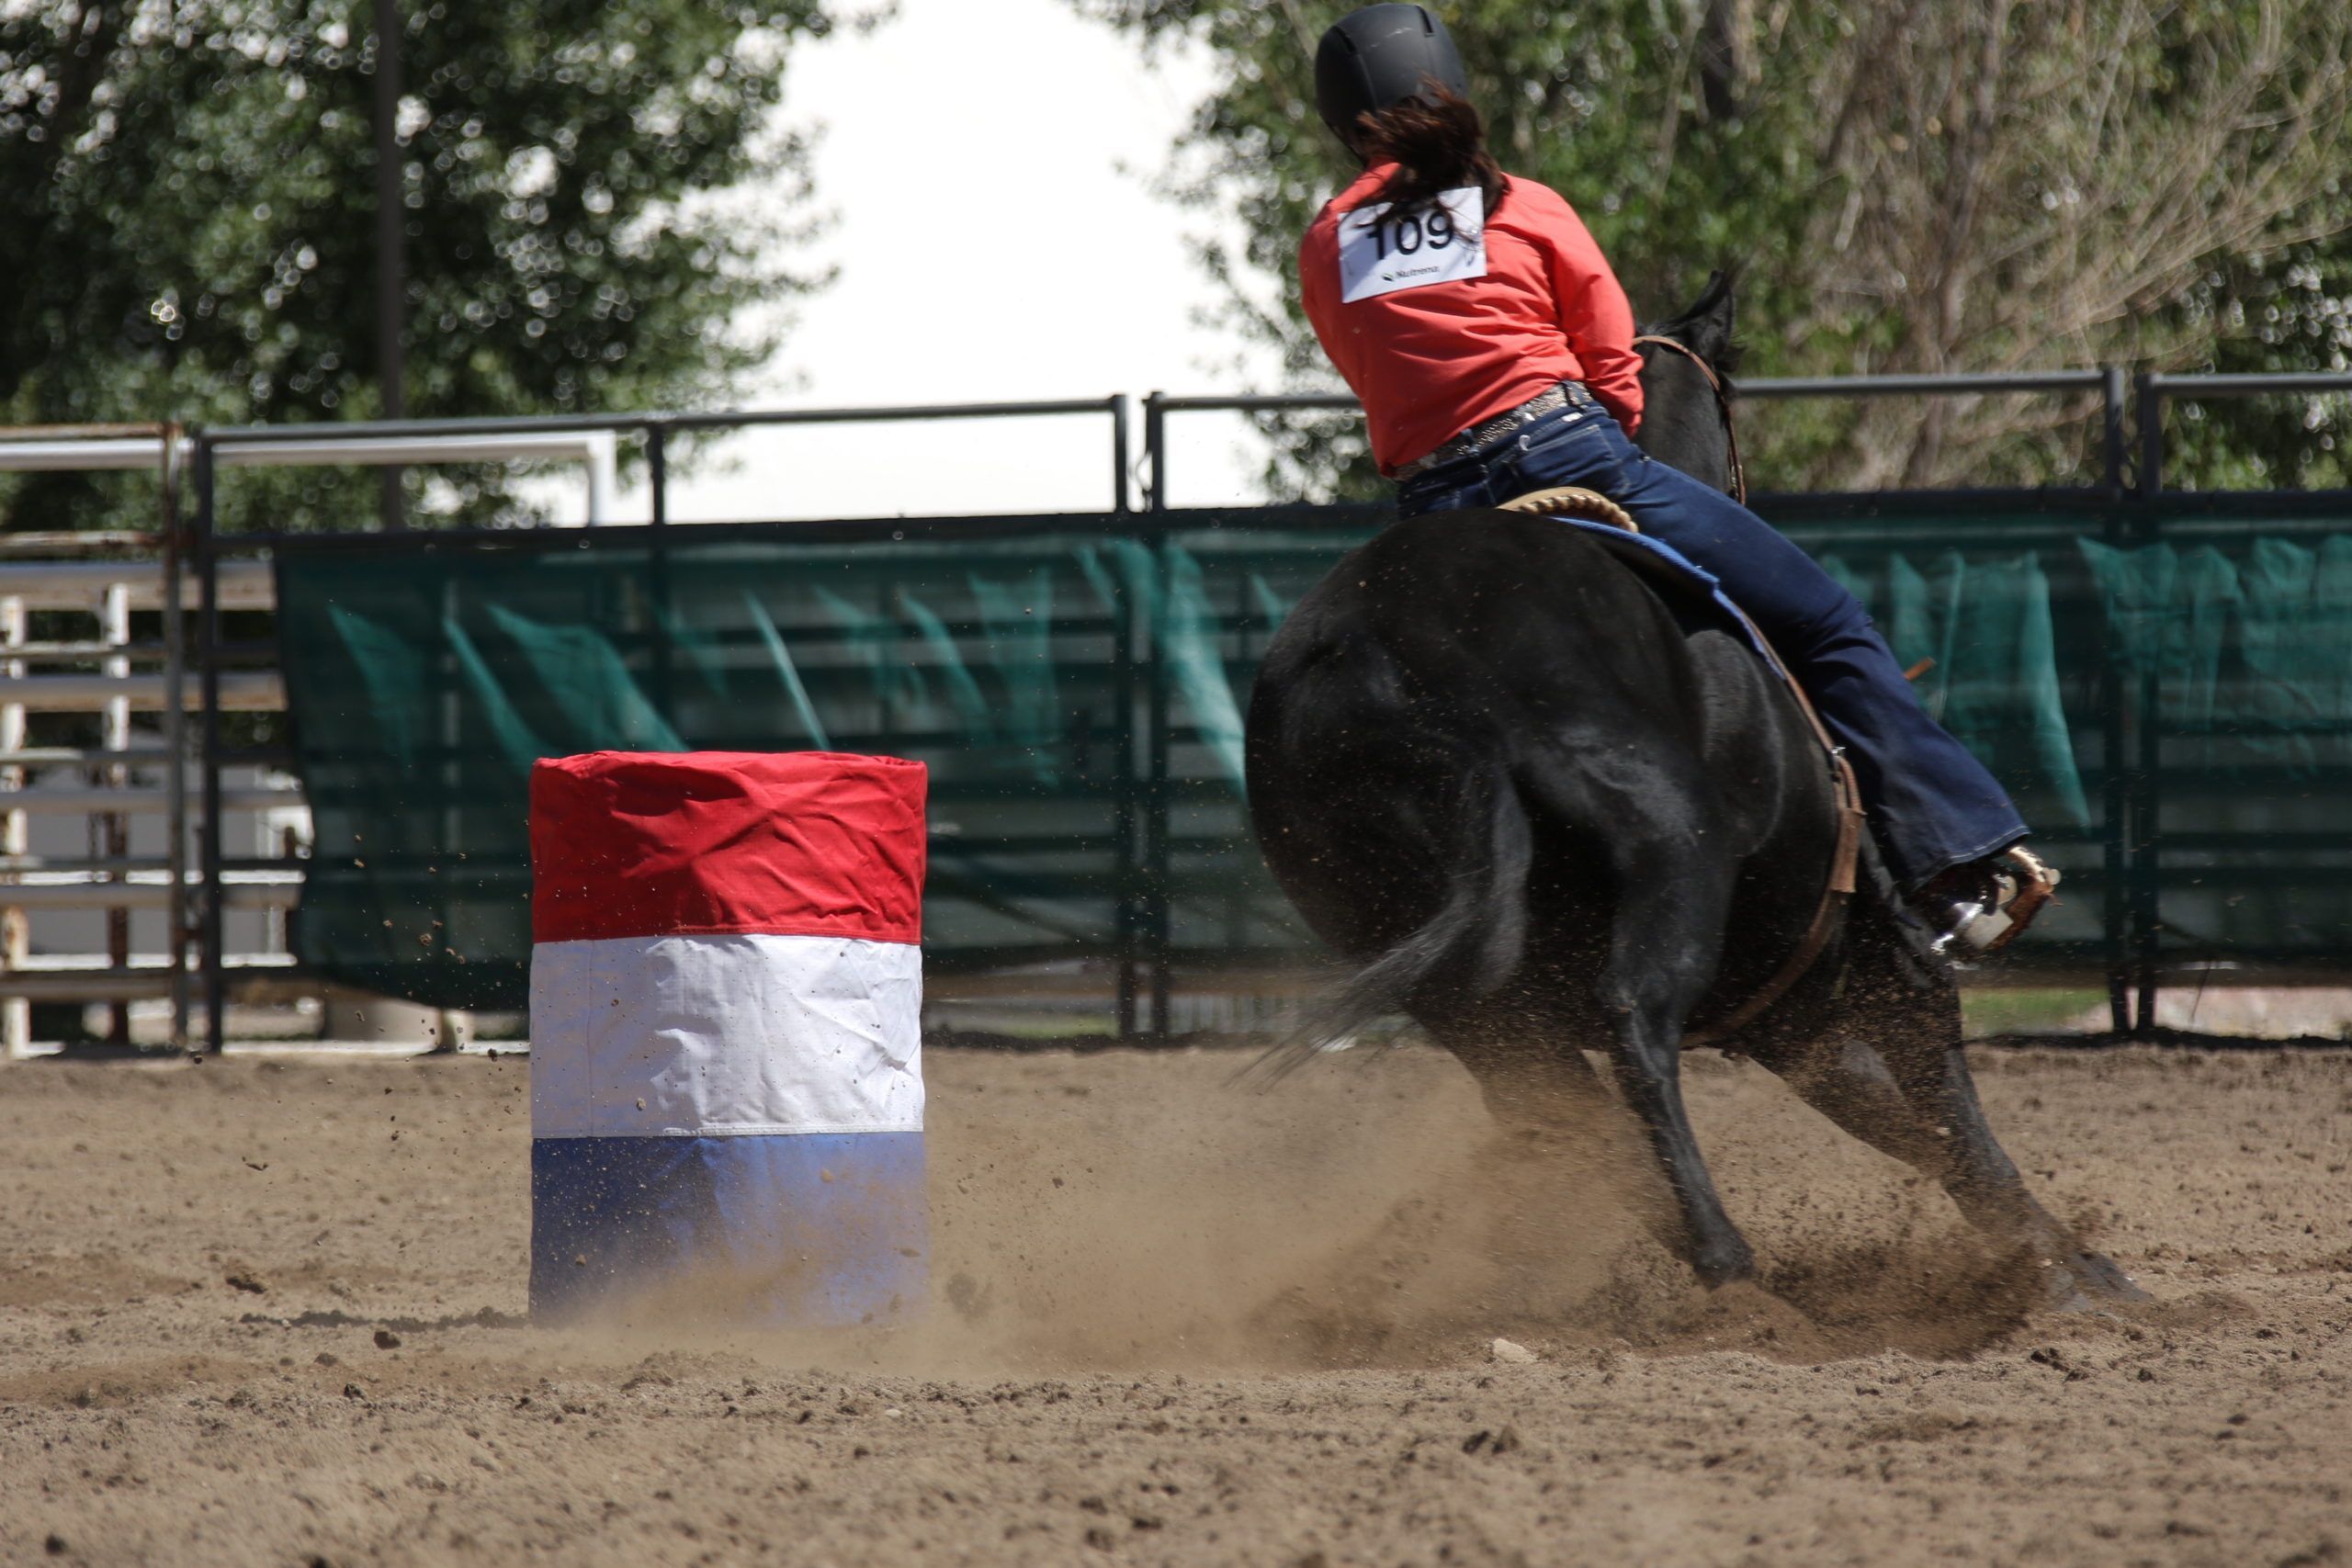 A cowgirl in a red shirt barrel racing at the Colorado State Fair